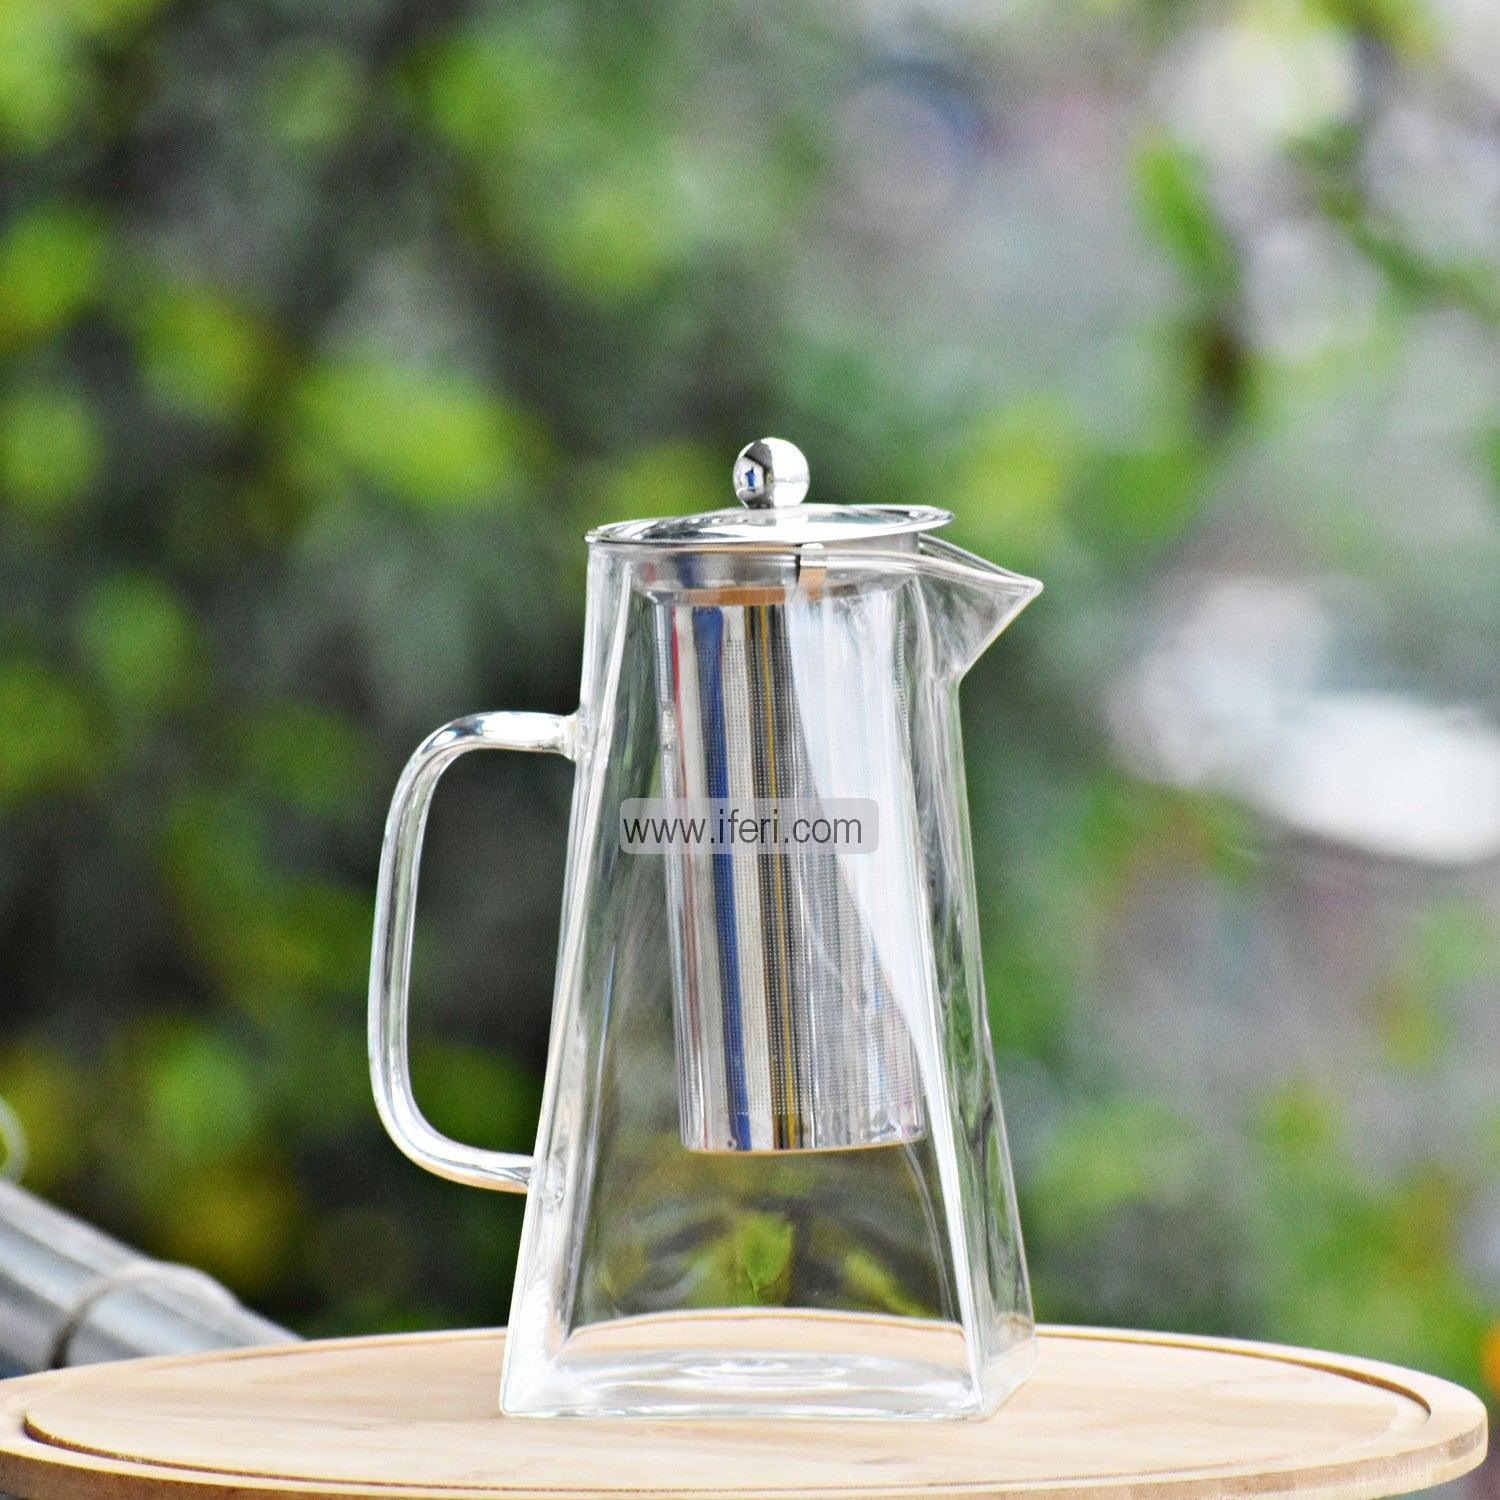 7.7 Inch Tempered Glass Tea Pot with Infuser RY0139 Price in Bangladesh - iferi.com